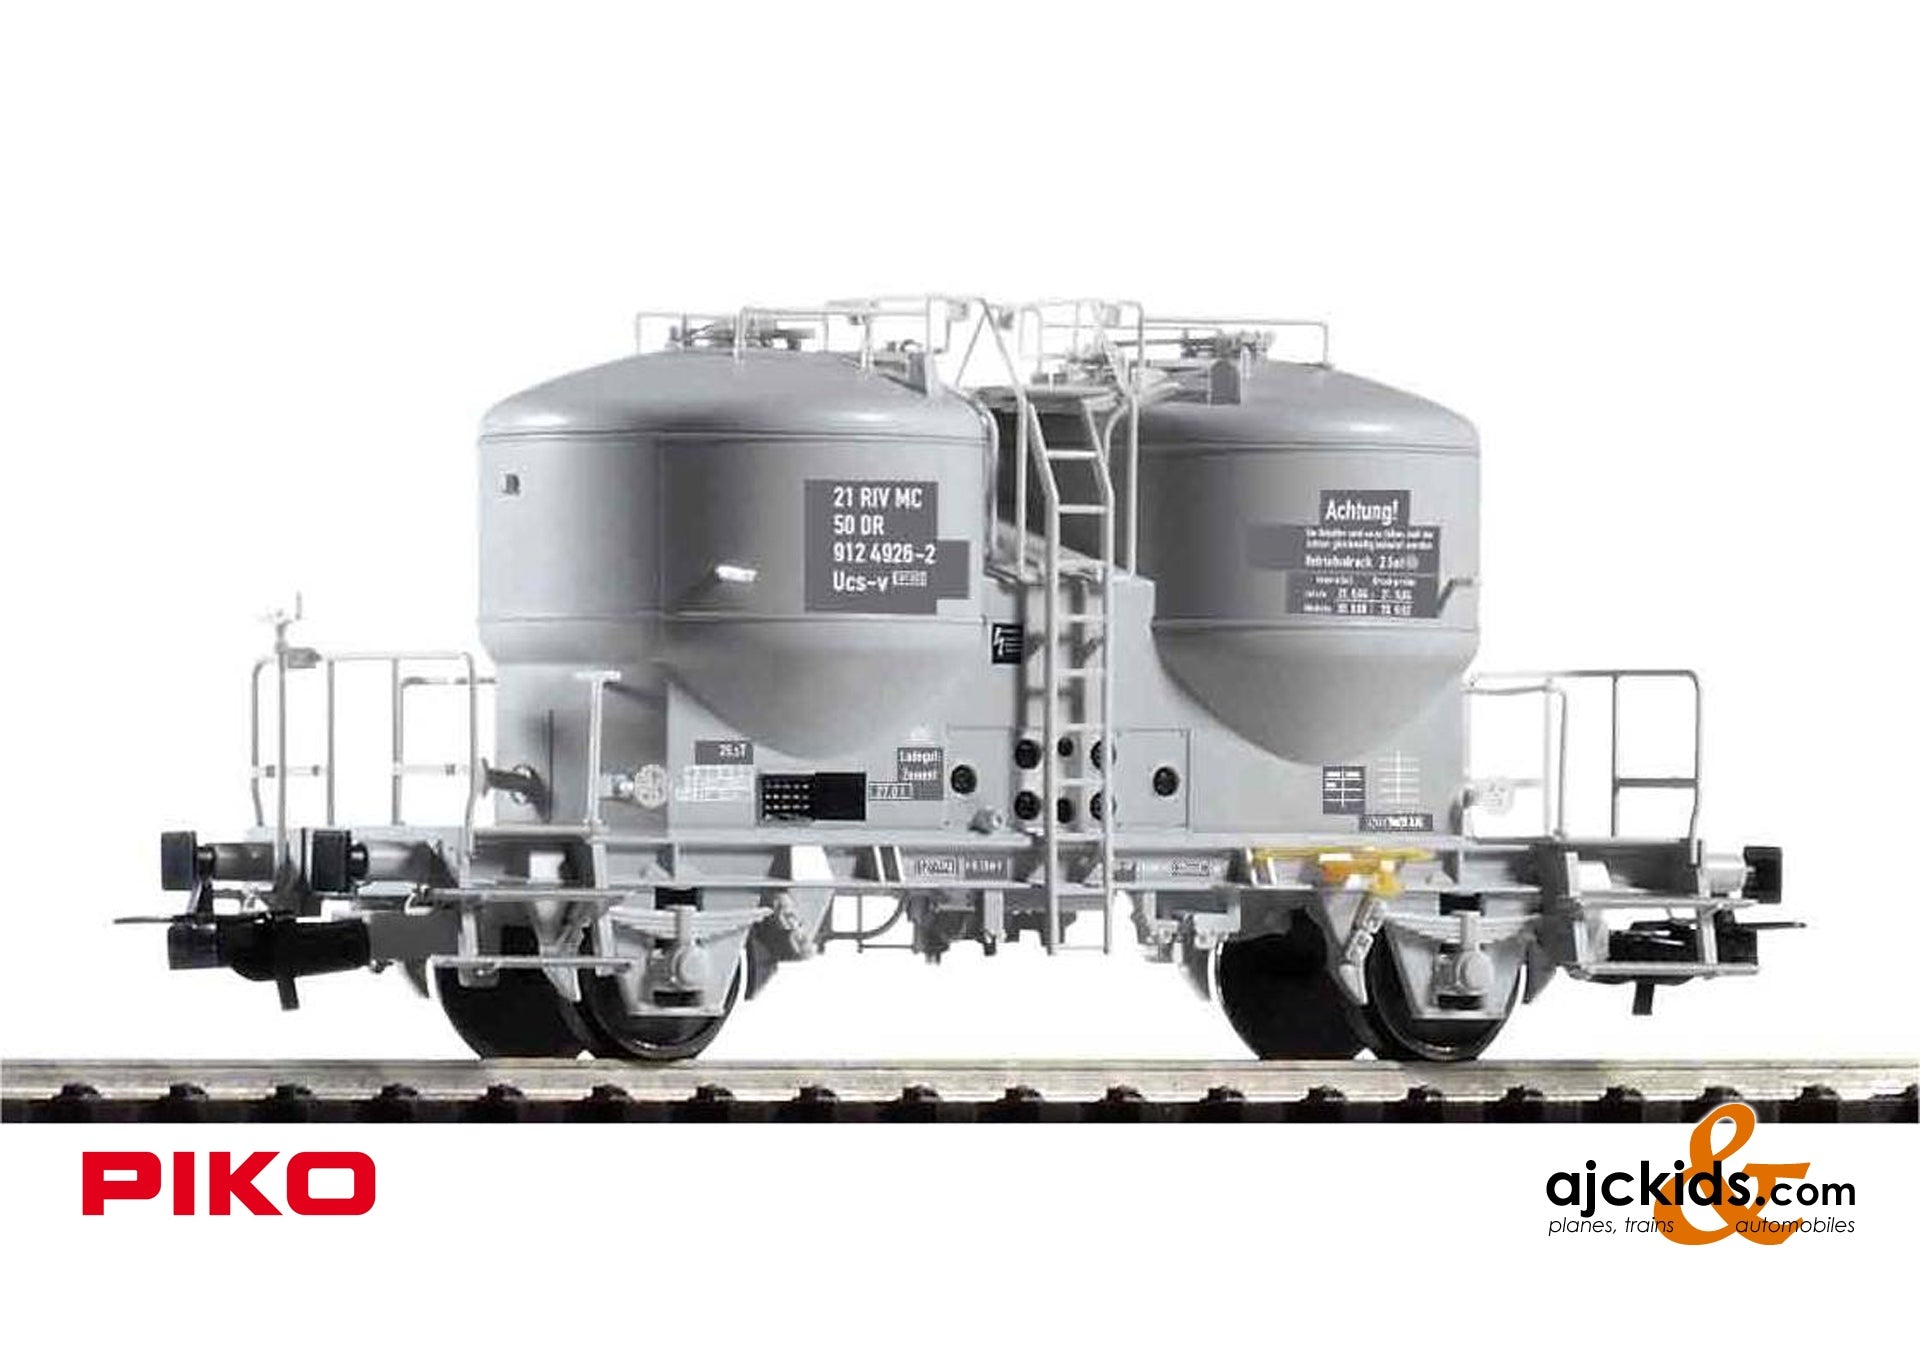 Piko 54699 Ucs Silo car w/patches DR IV